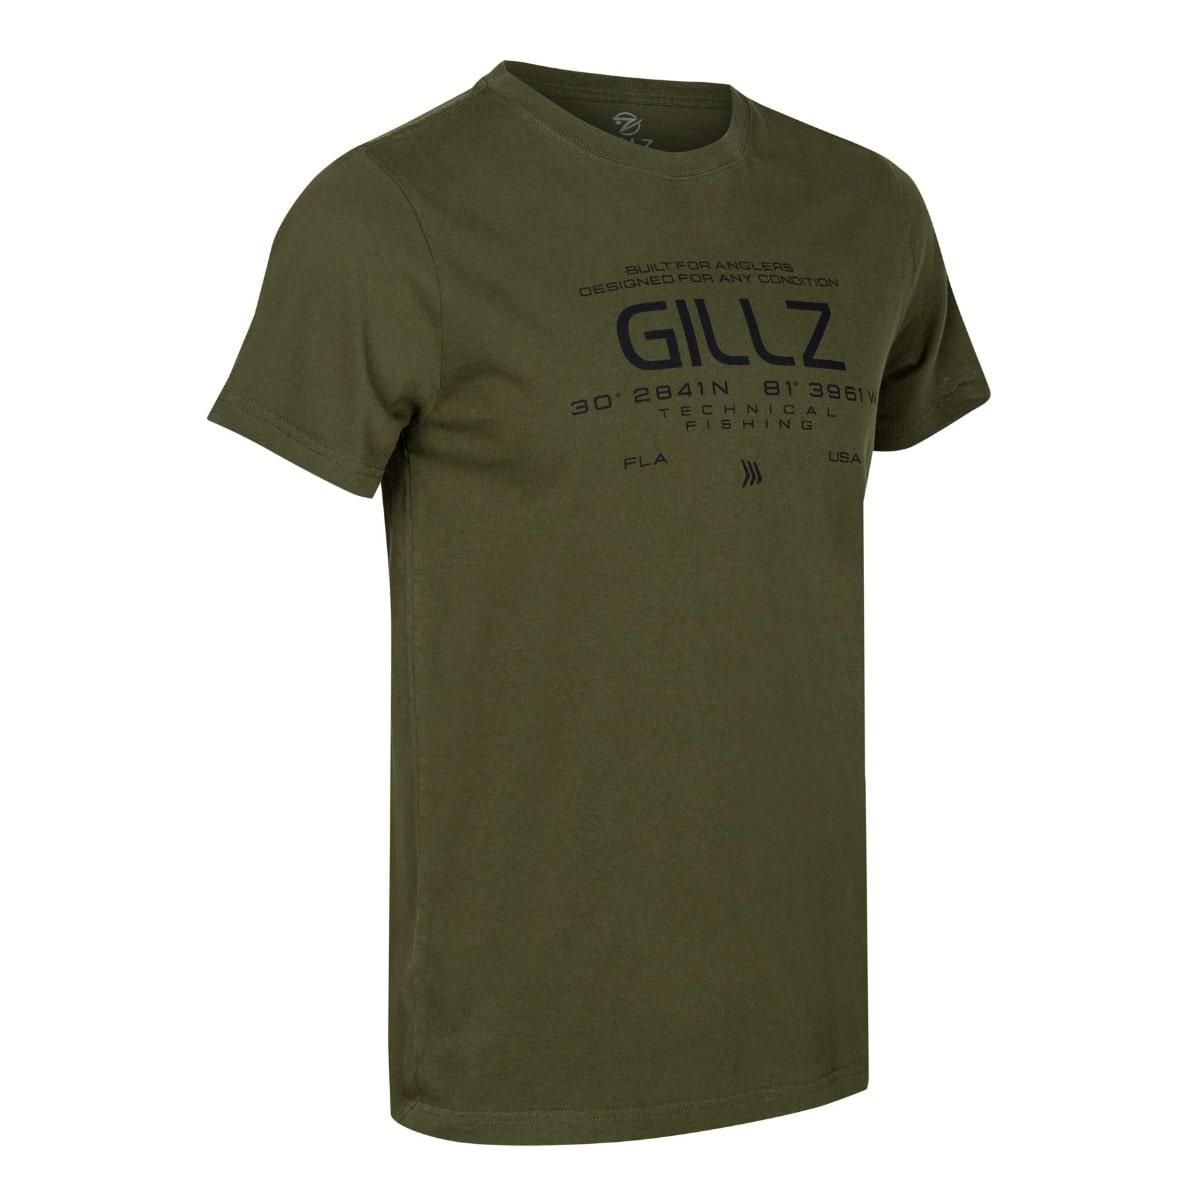 Contender Series SS Graphic Tee - Gillz